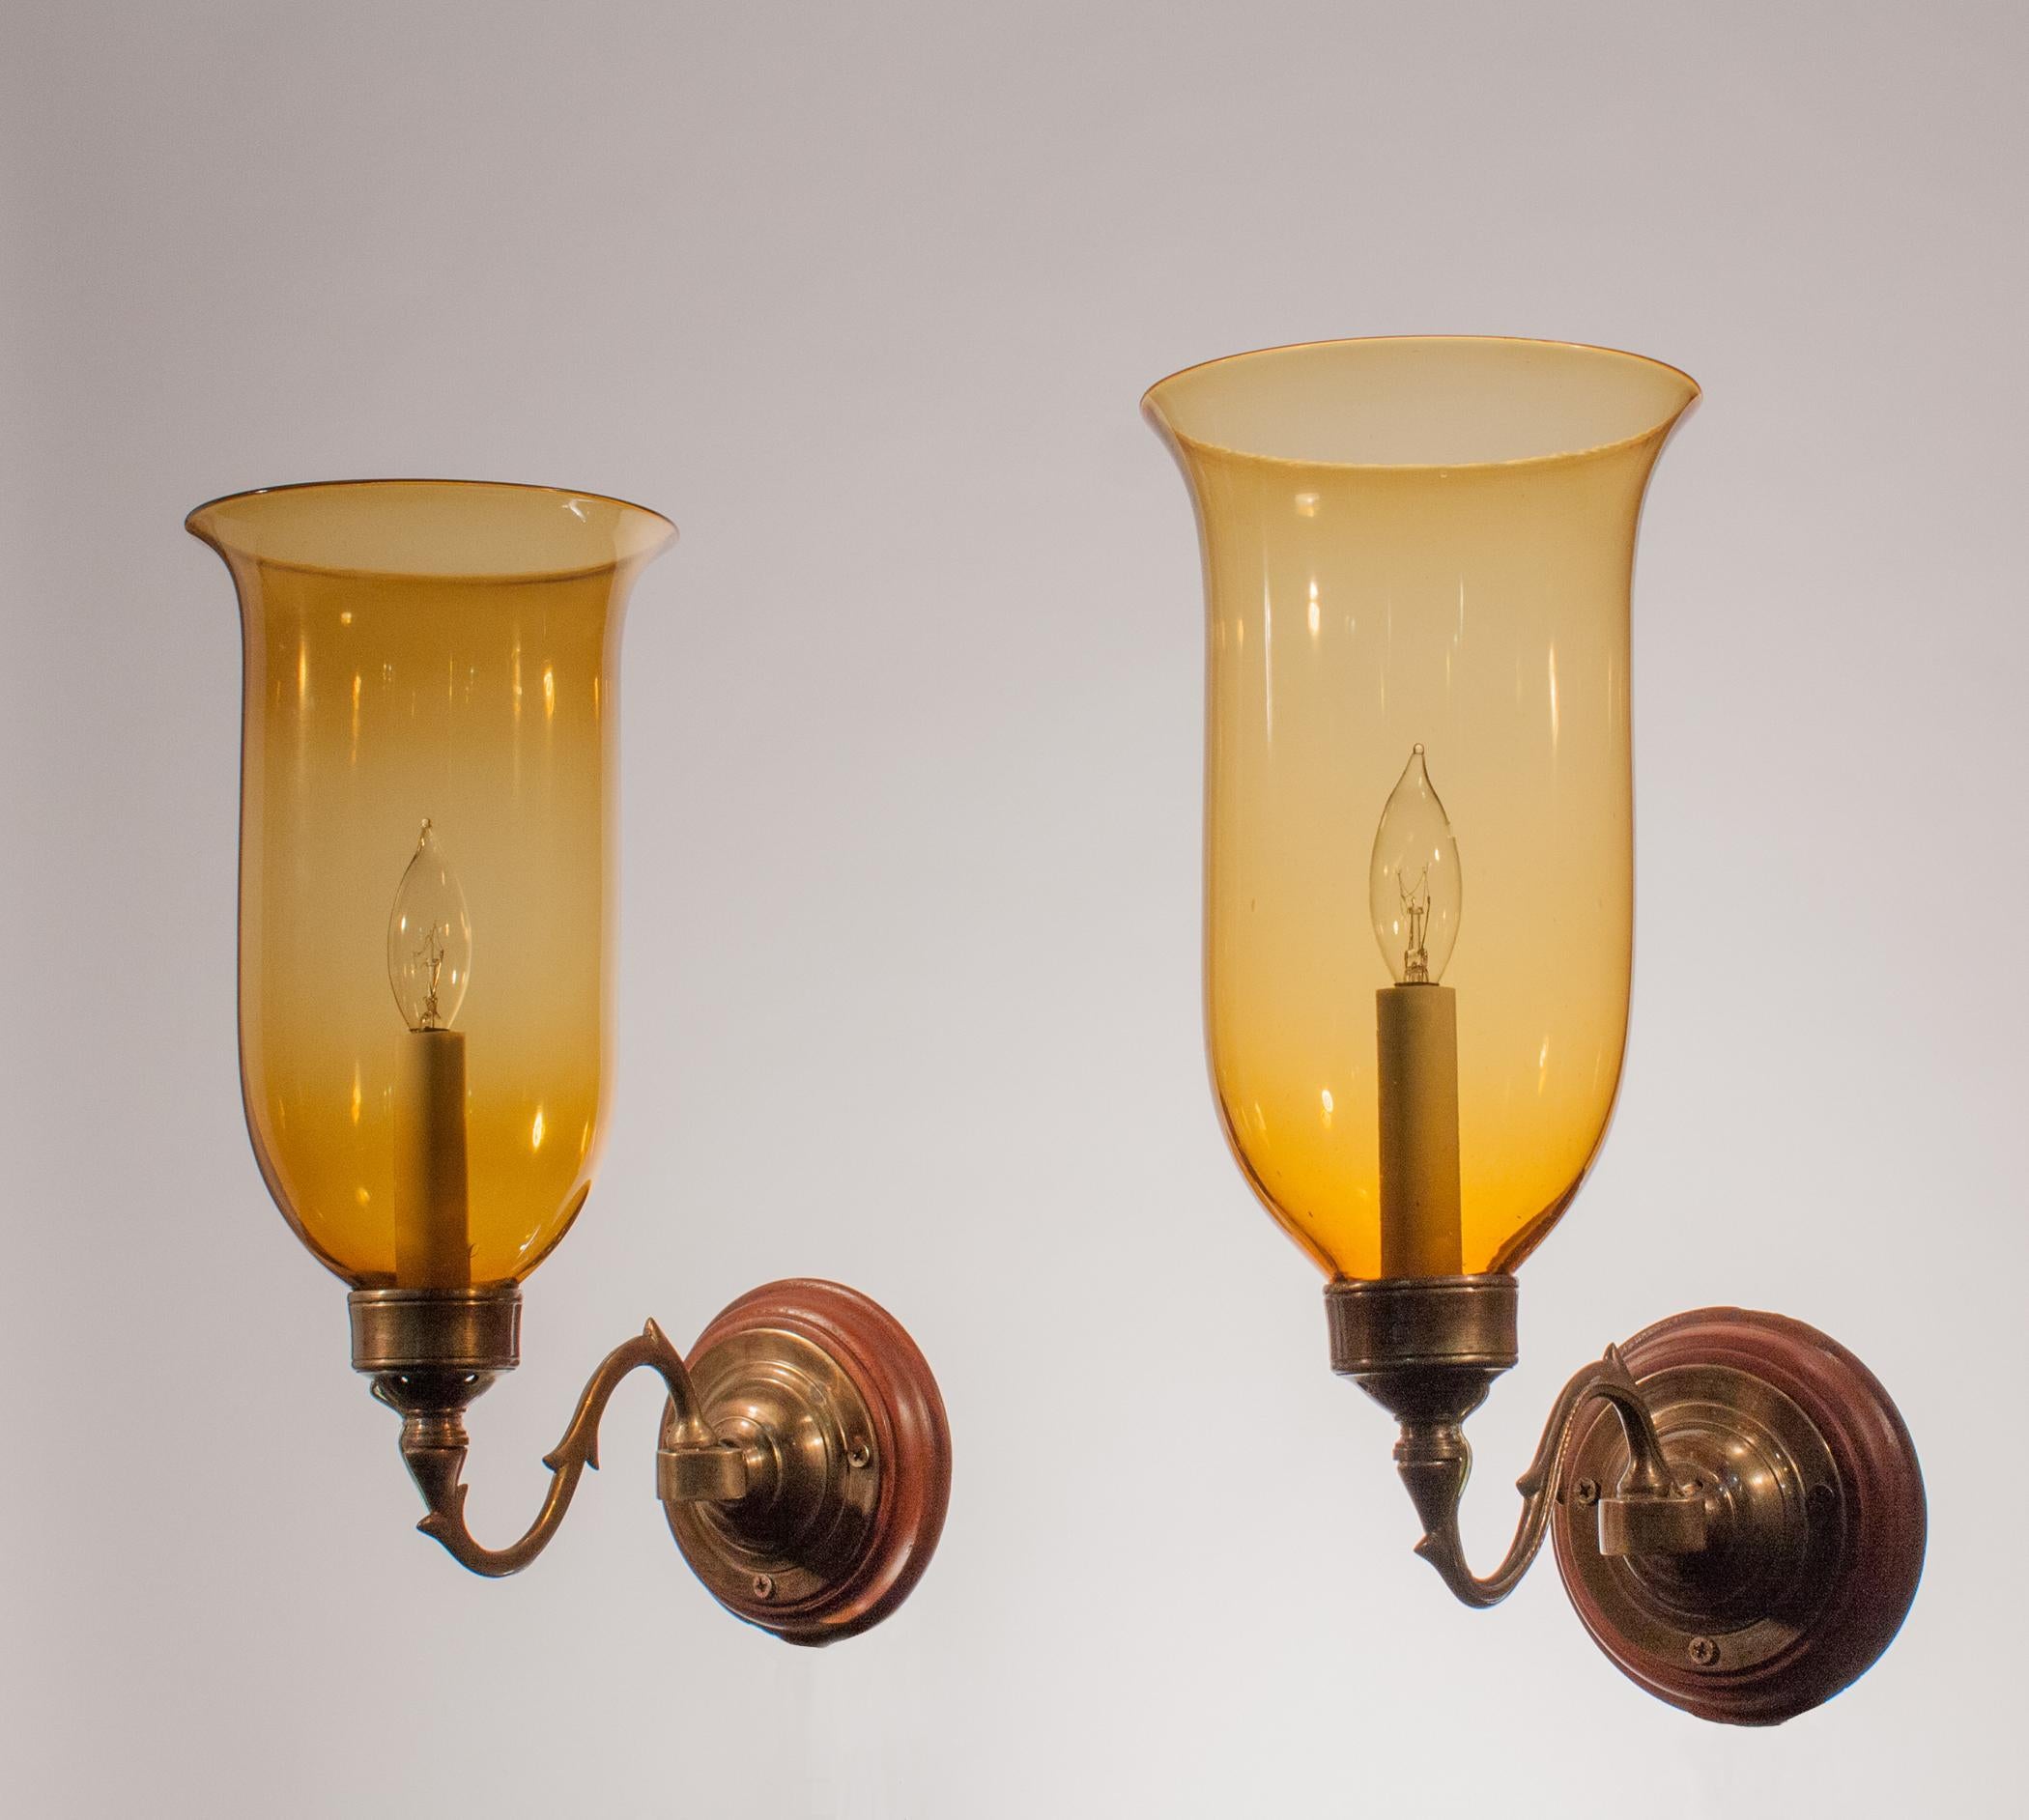 High Victorian 19th Century Hurricane Shade Sconces with Amber Colored Glass